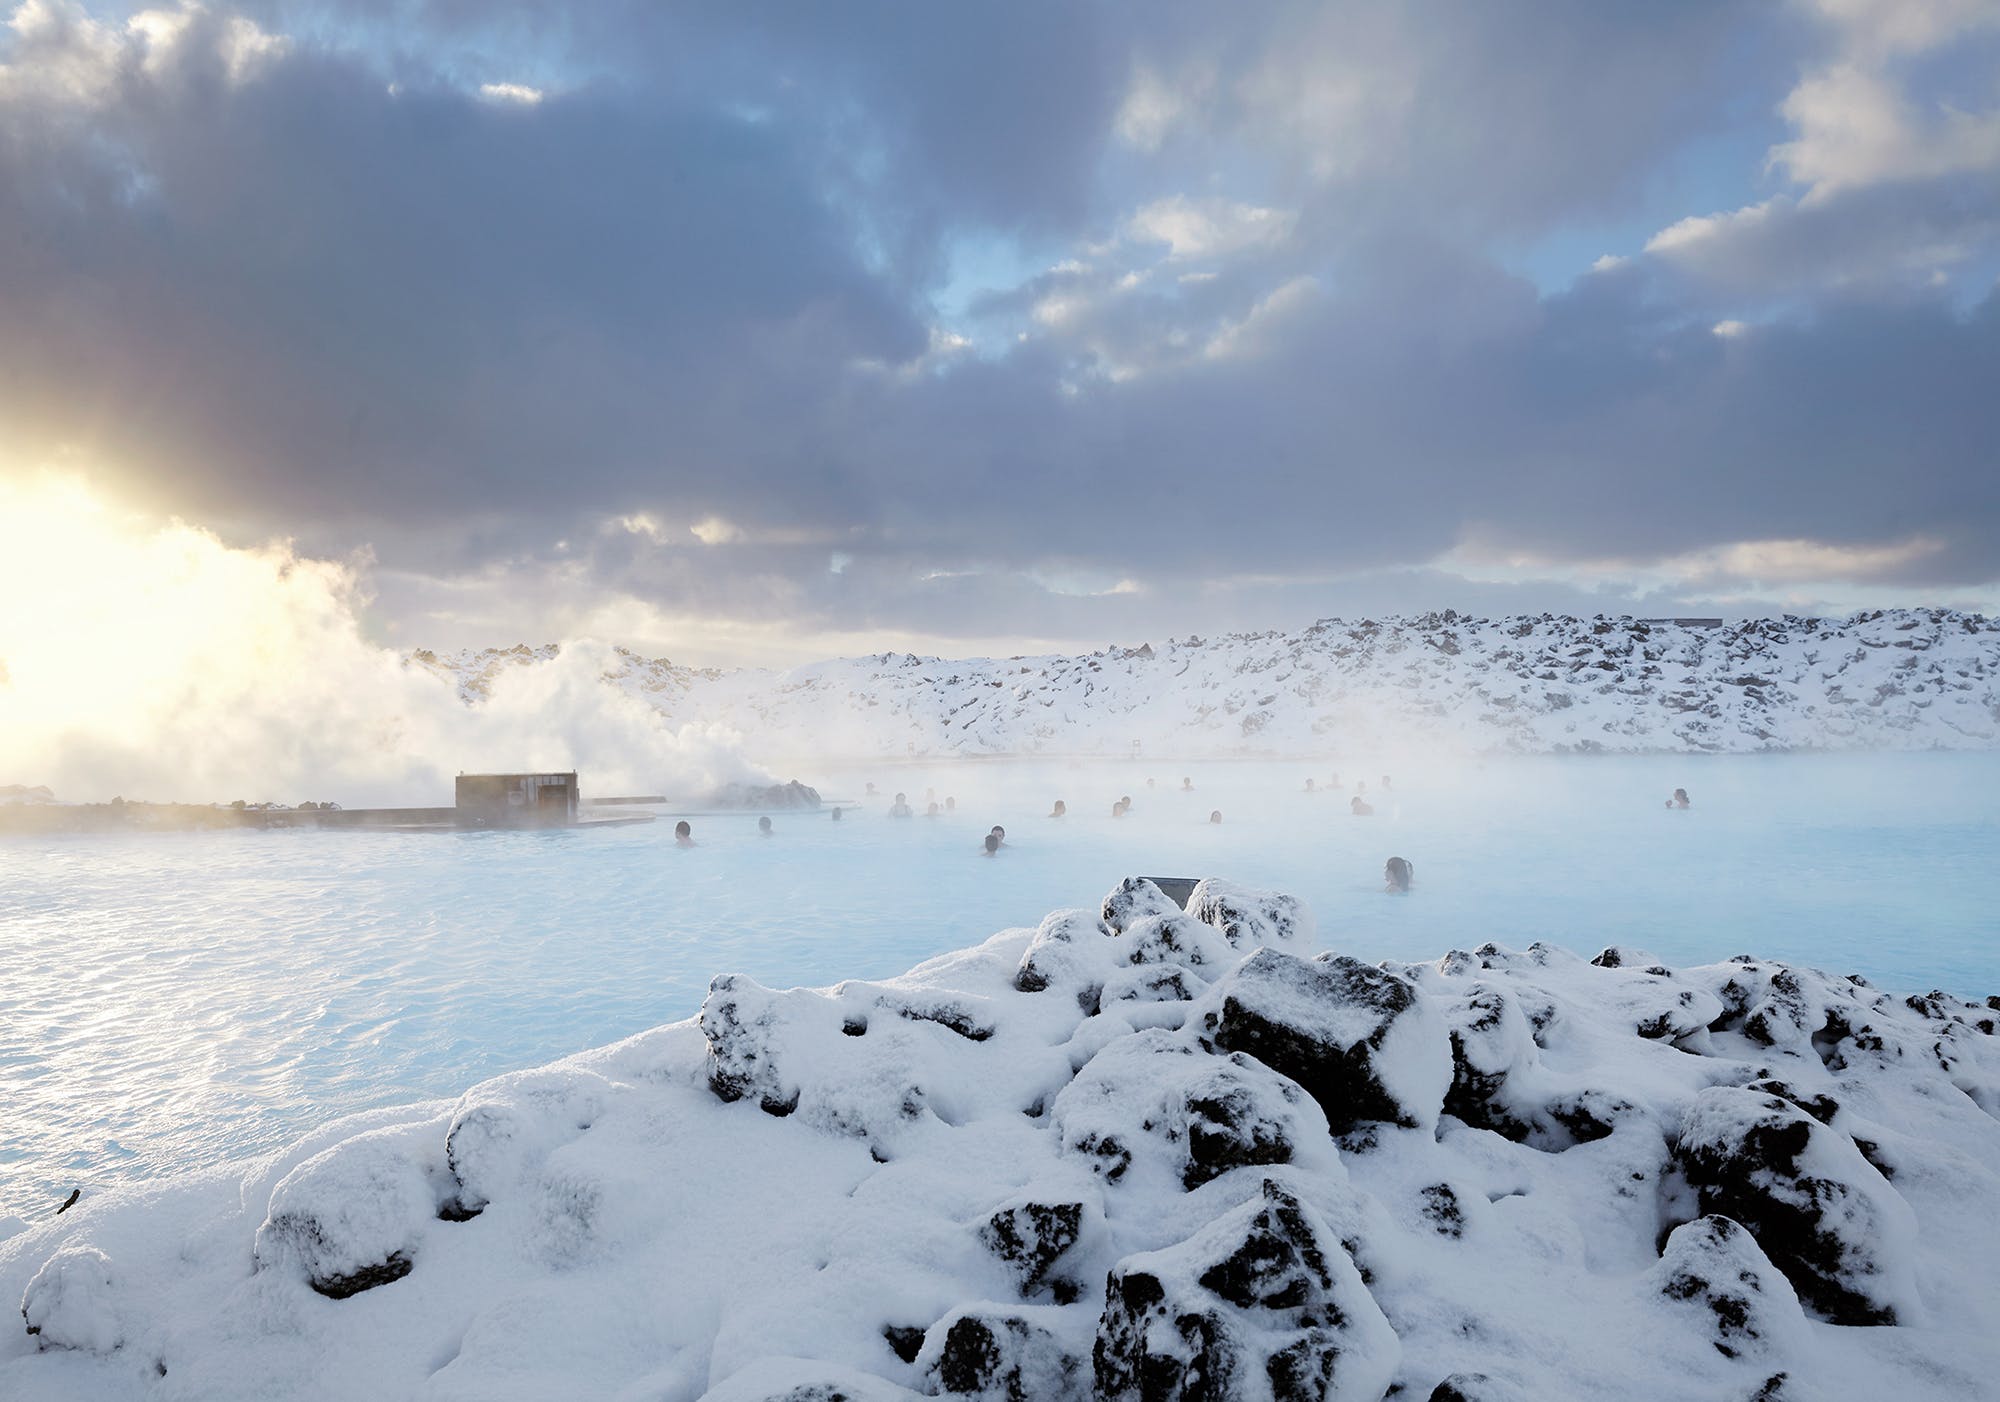 The Blue Lagoon spa is nestled in a lava field and is but a short drive from Keflavík International Airport, making it the perfect place to start your Iceland adventure.